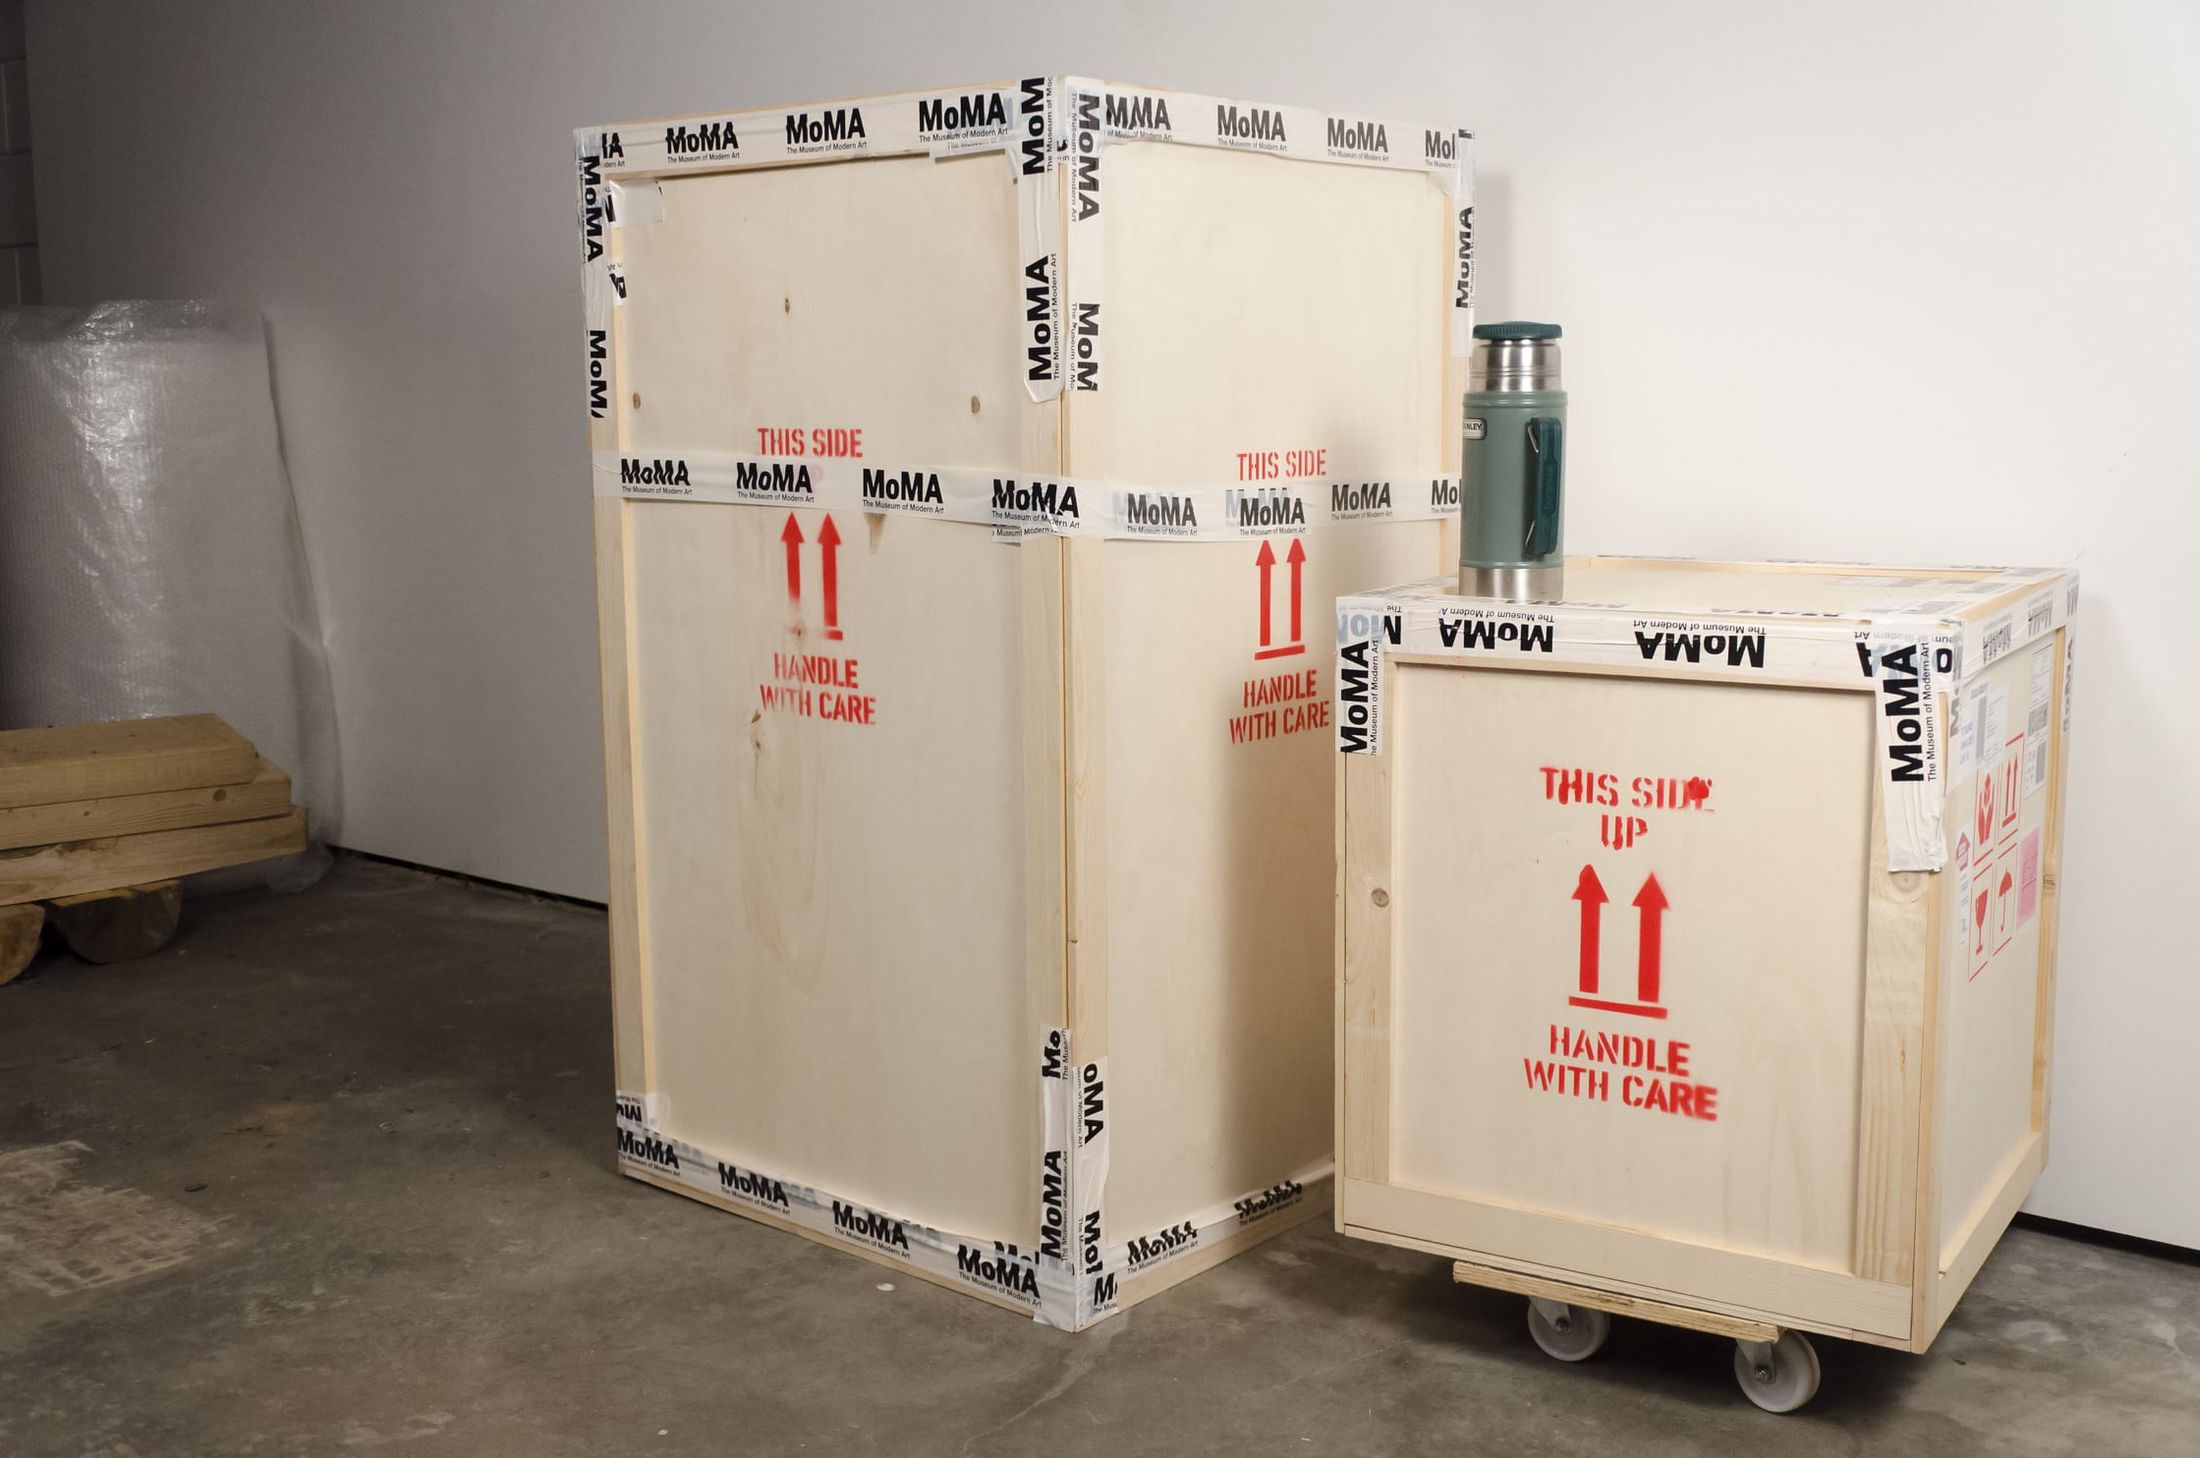 Art shipping crates, secured with MoMA tape by Melle Nieling